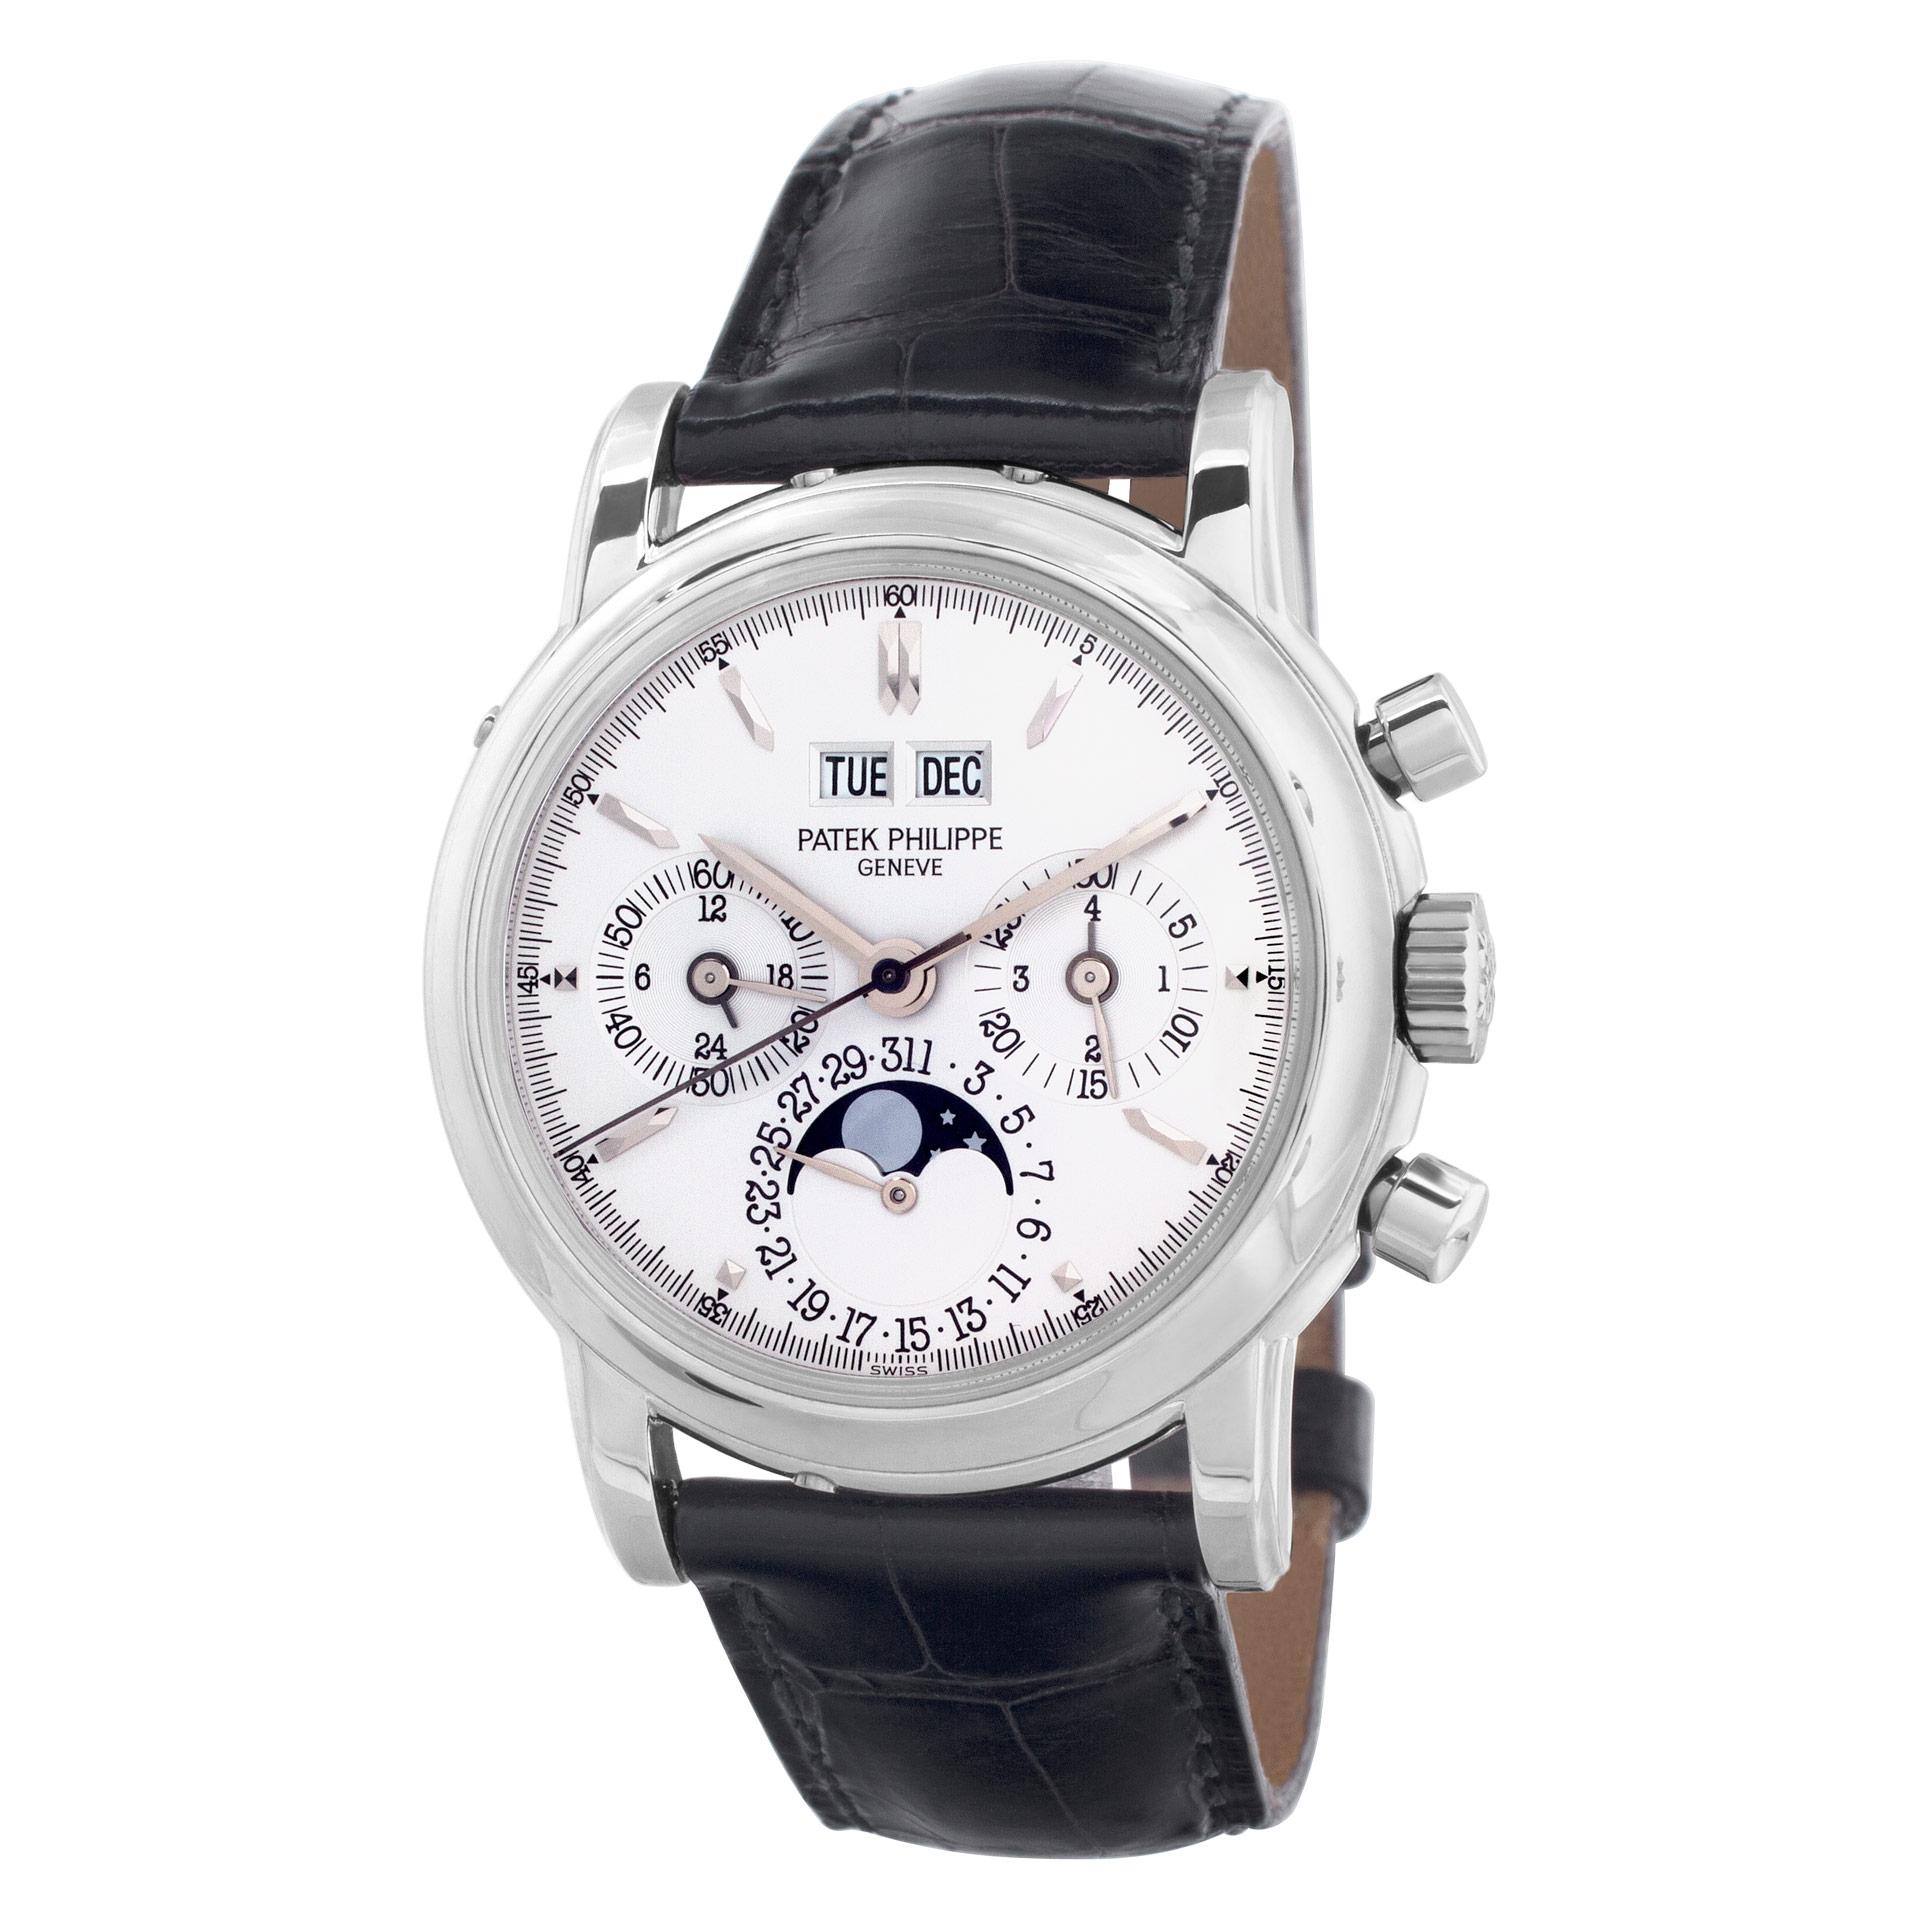 YOUR PRICE: $159,735.00

Collectible Patek Philippe Perpetual Calendar Chronograph in platinum on a black alligator strap with platinum deployment buckle. Manual w/ sub-seconds, date, day, perpetual calendar, chronograph and moon phase. With box and